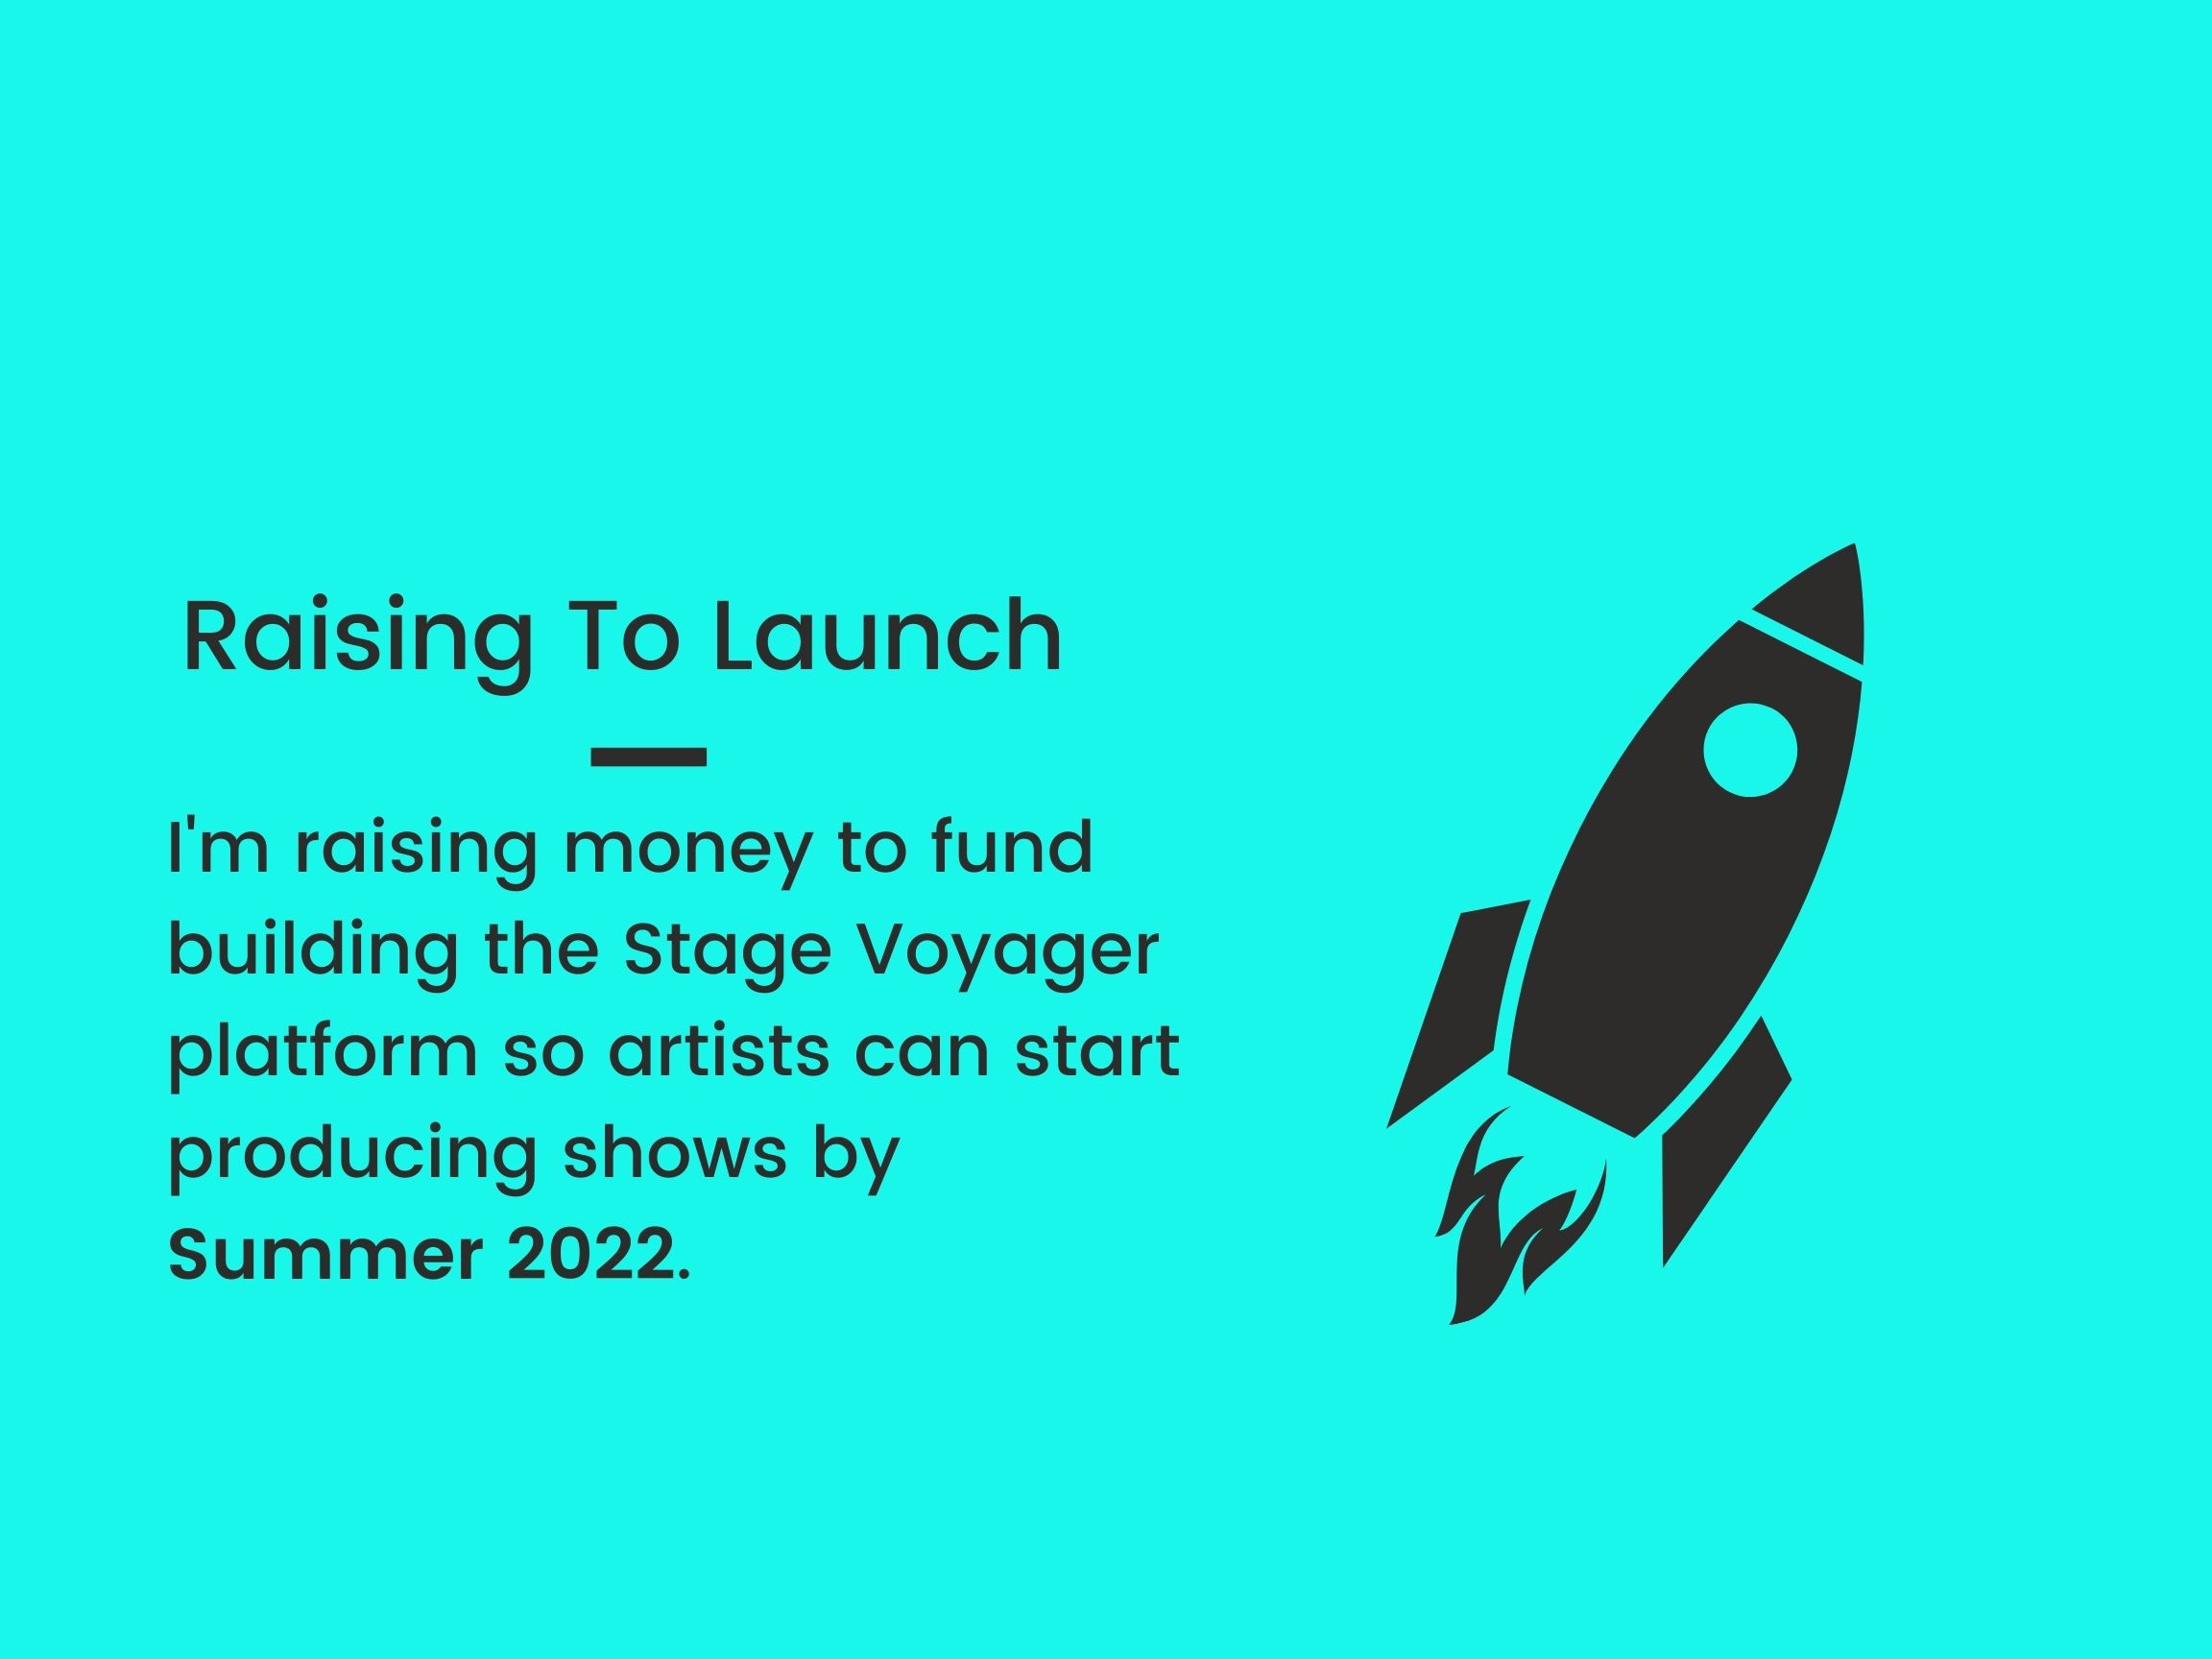 Fundraising $50k to build and launch